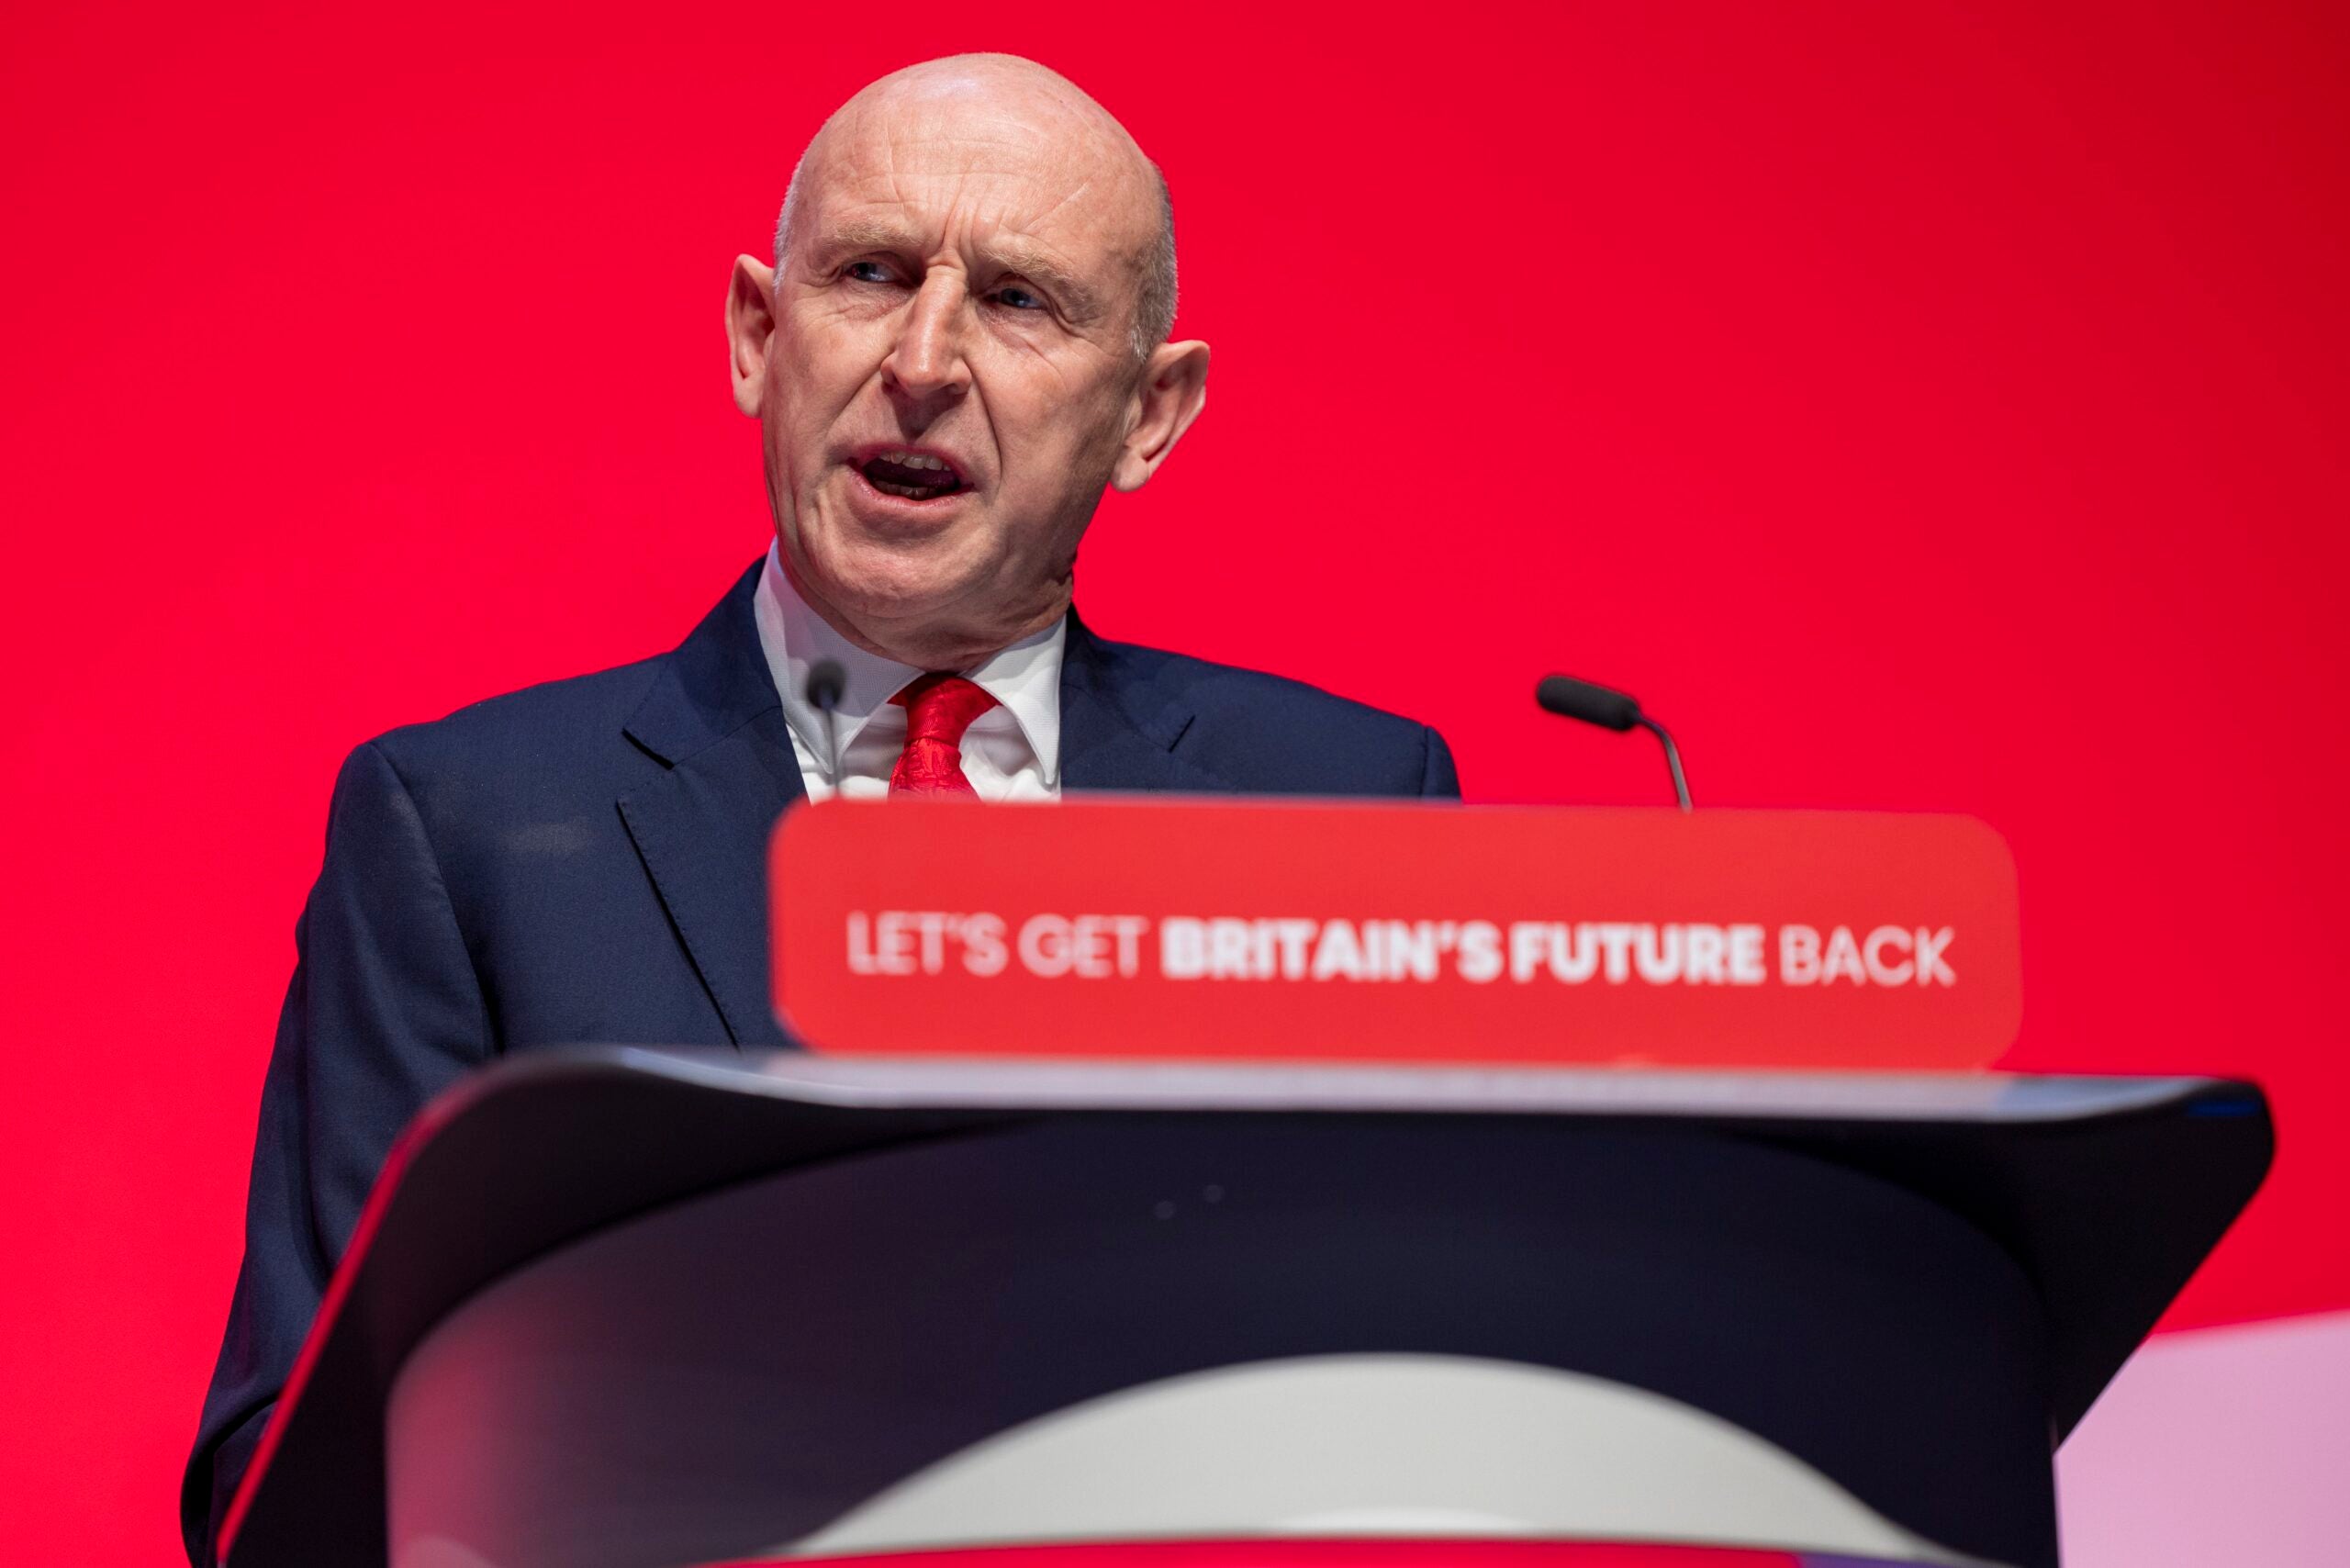 John Healey MP speaking on second day of the Labour Party conference, Monday the 9th of October 2023 in Liverpool, United Kingdom. (photo by Andrew Aitchison / In Pictures via Getty Images)